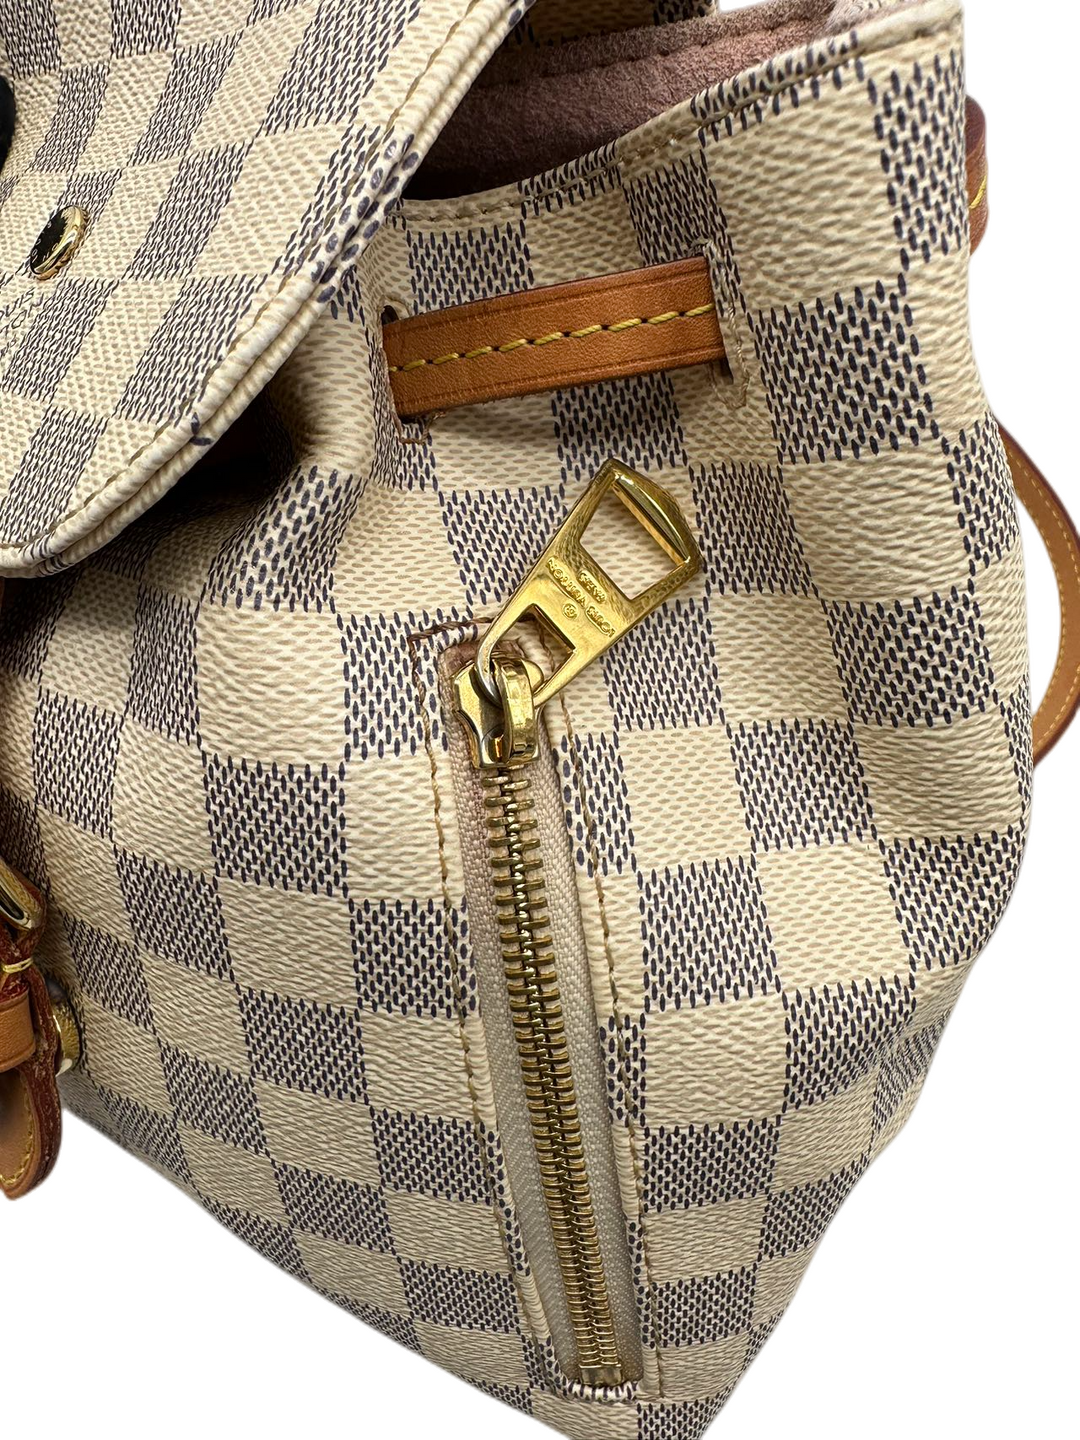 AUTHENTIC Louis Vuitton Sperone Backpack Damier Azur PREOWNED